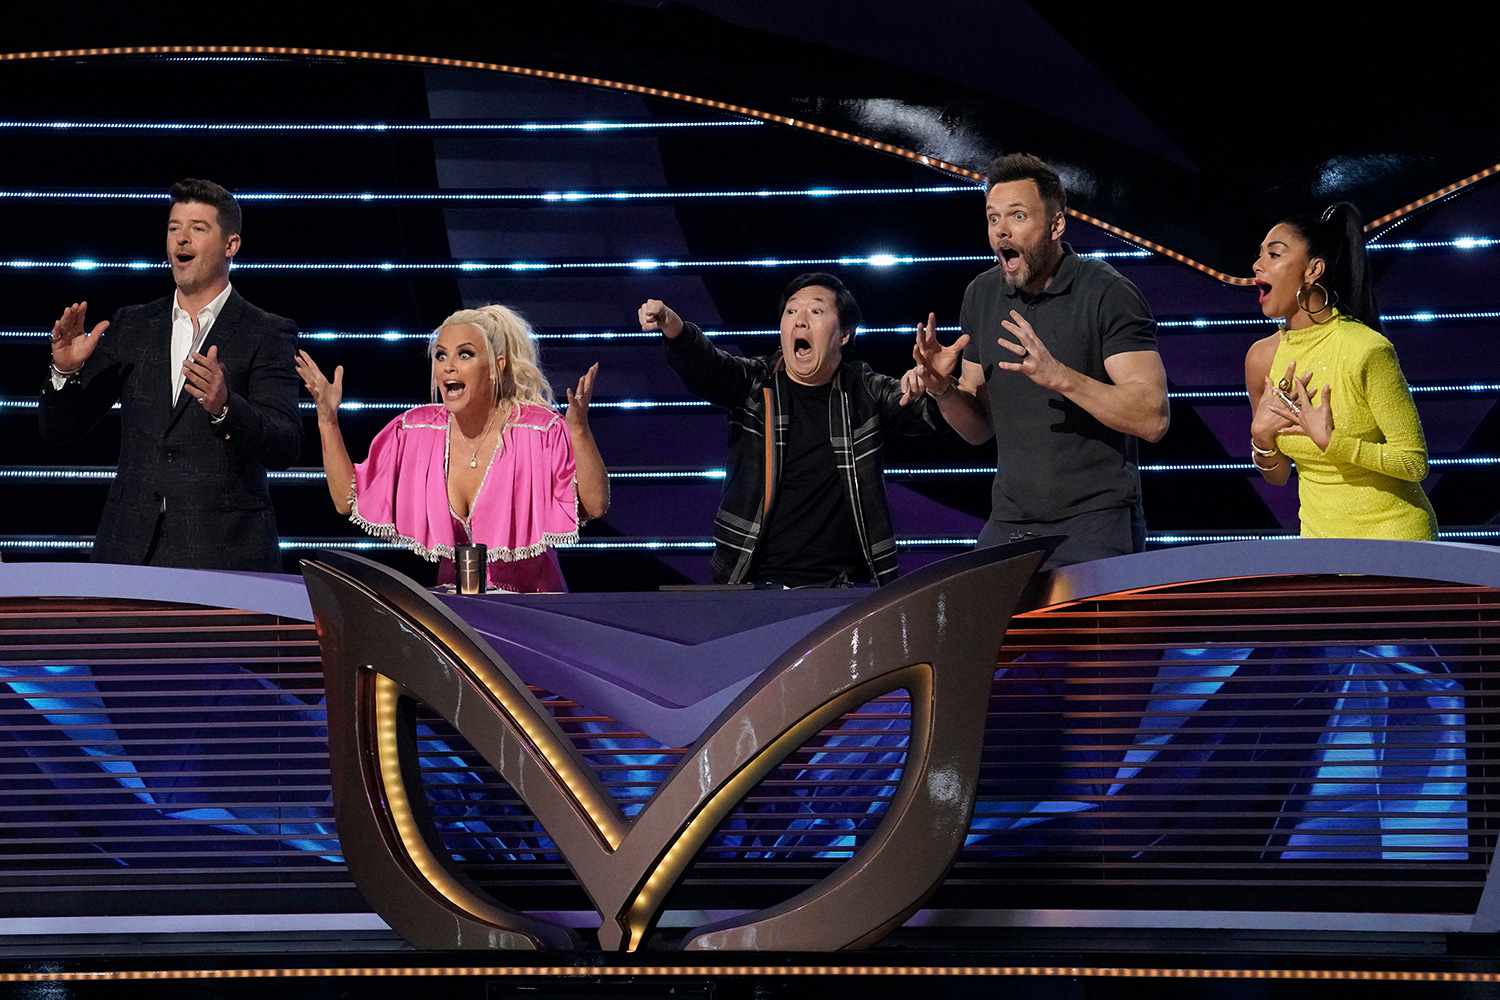 The Masked Singer: L-R: Robin Thicke, Jenny McCarthy, Ken Jeong, guest panelist Joel McHale and Nicole Scherzinger in the &ldquo;It Never Hurts to Mask: Group C Playoffs&rdquo; episode of THE MASKED SINGER airing Wednesday, March 18